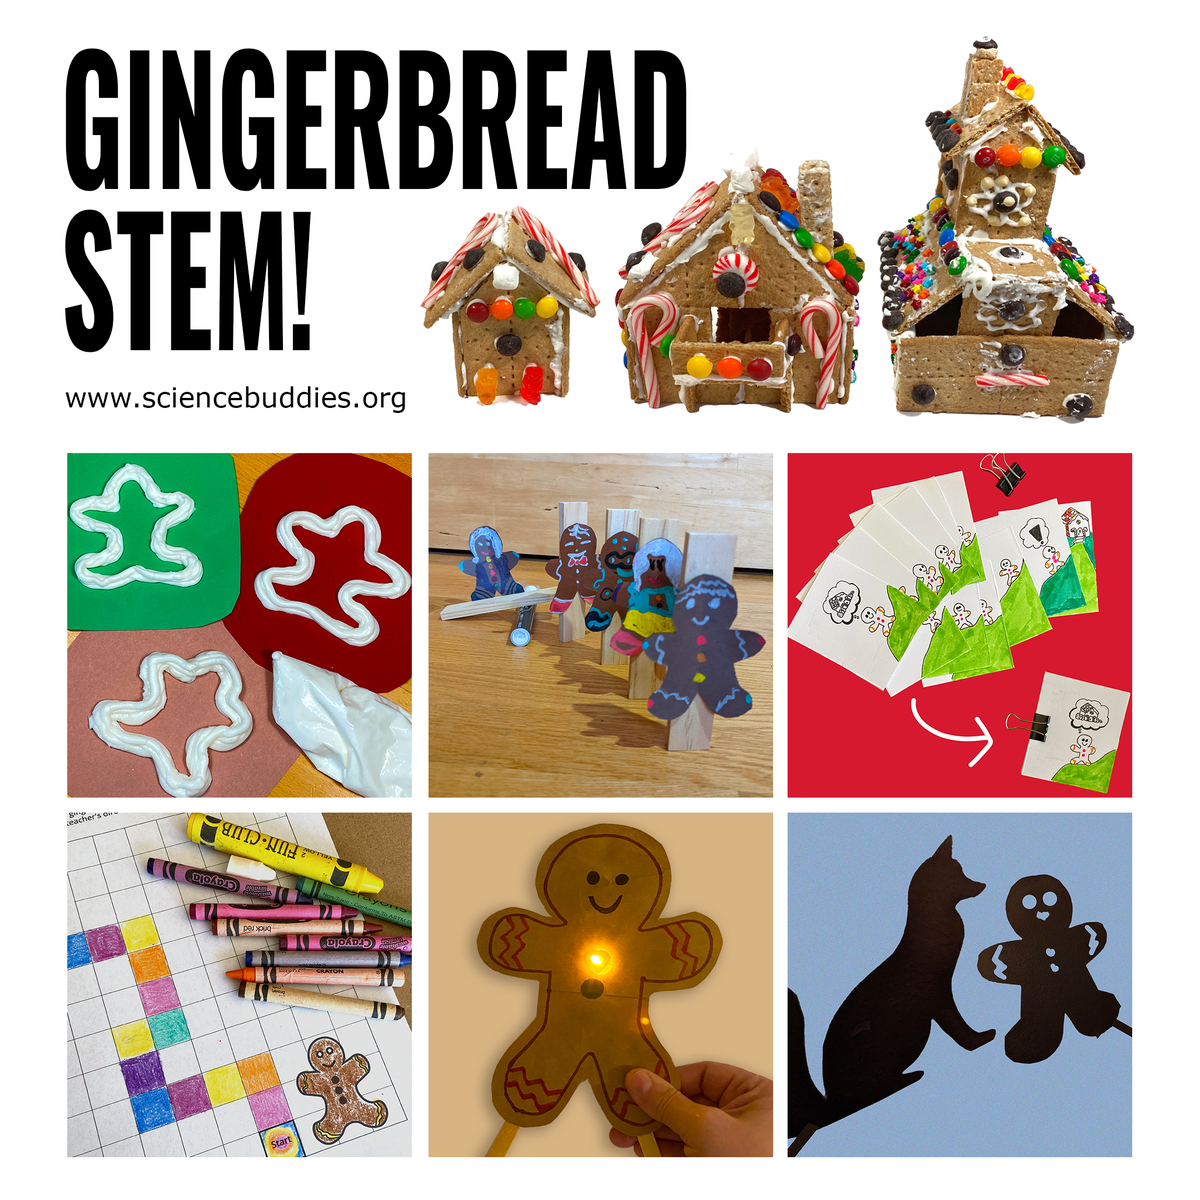 Educator's Corner Gingerbread STEM Experiments including gingerbread house building, gingerbread people as a 3D printing experiment with icing, light-up gingerbread people, a gingerbread-themed flipbook, and a gingerbread rube goldberg machine